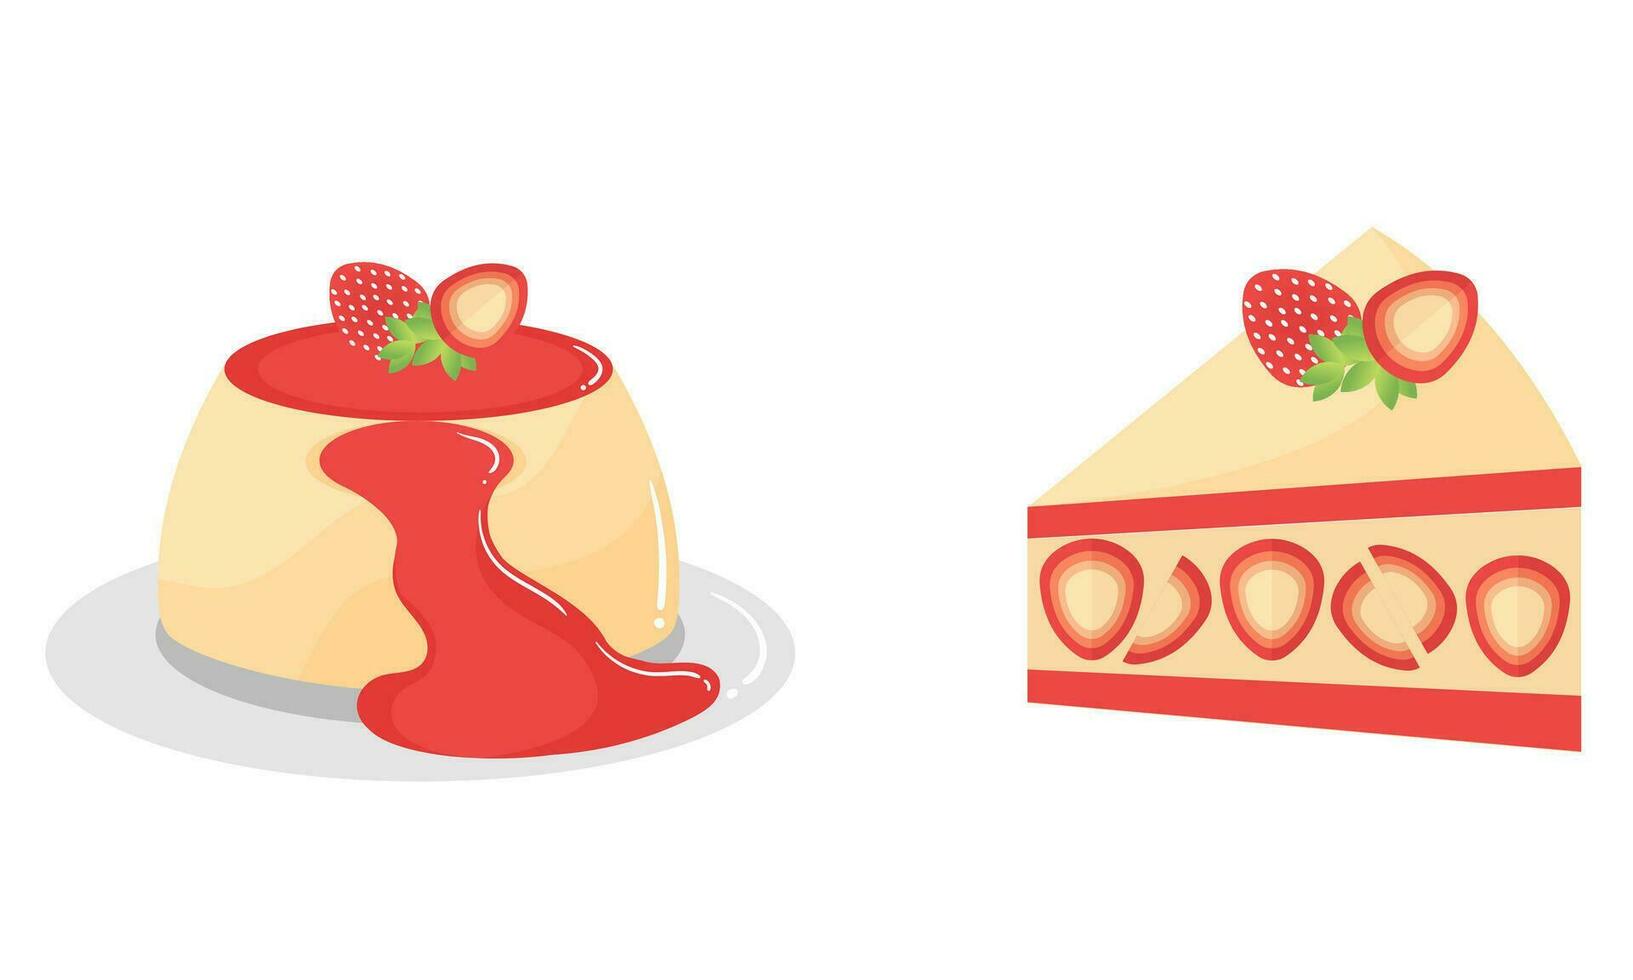 strawberry flavored cake and pudding illustration vector